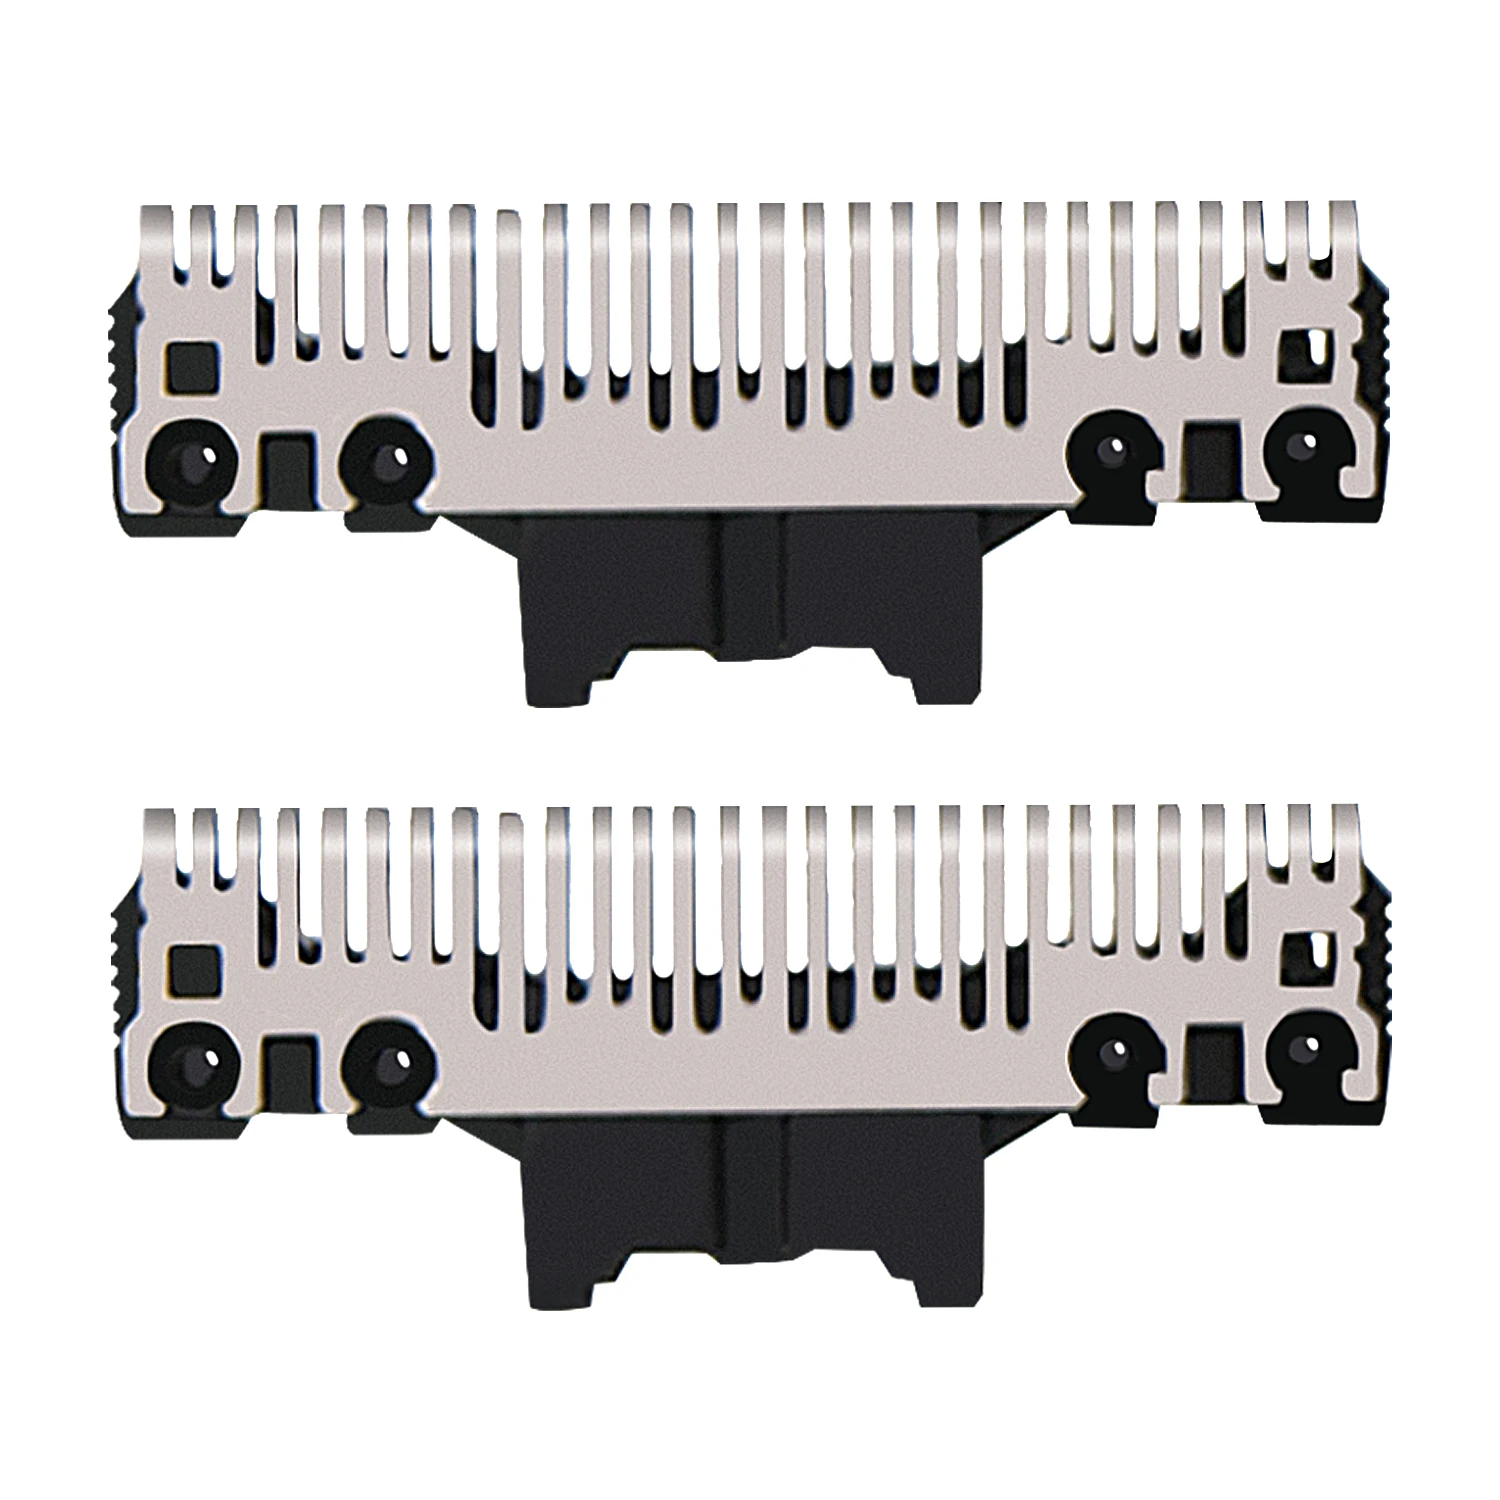 

2pc Shaver Head Cutter blades ES9072 for Panasonic ES8016 ES7027 ES7021 ES7022 ES7016 ES8026 ES8035 ES7005 ES7006 ES8018 ES7026